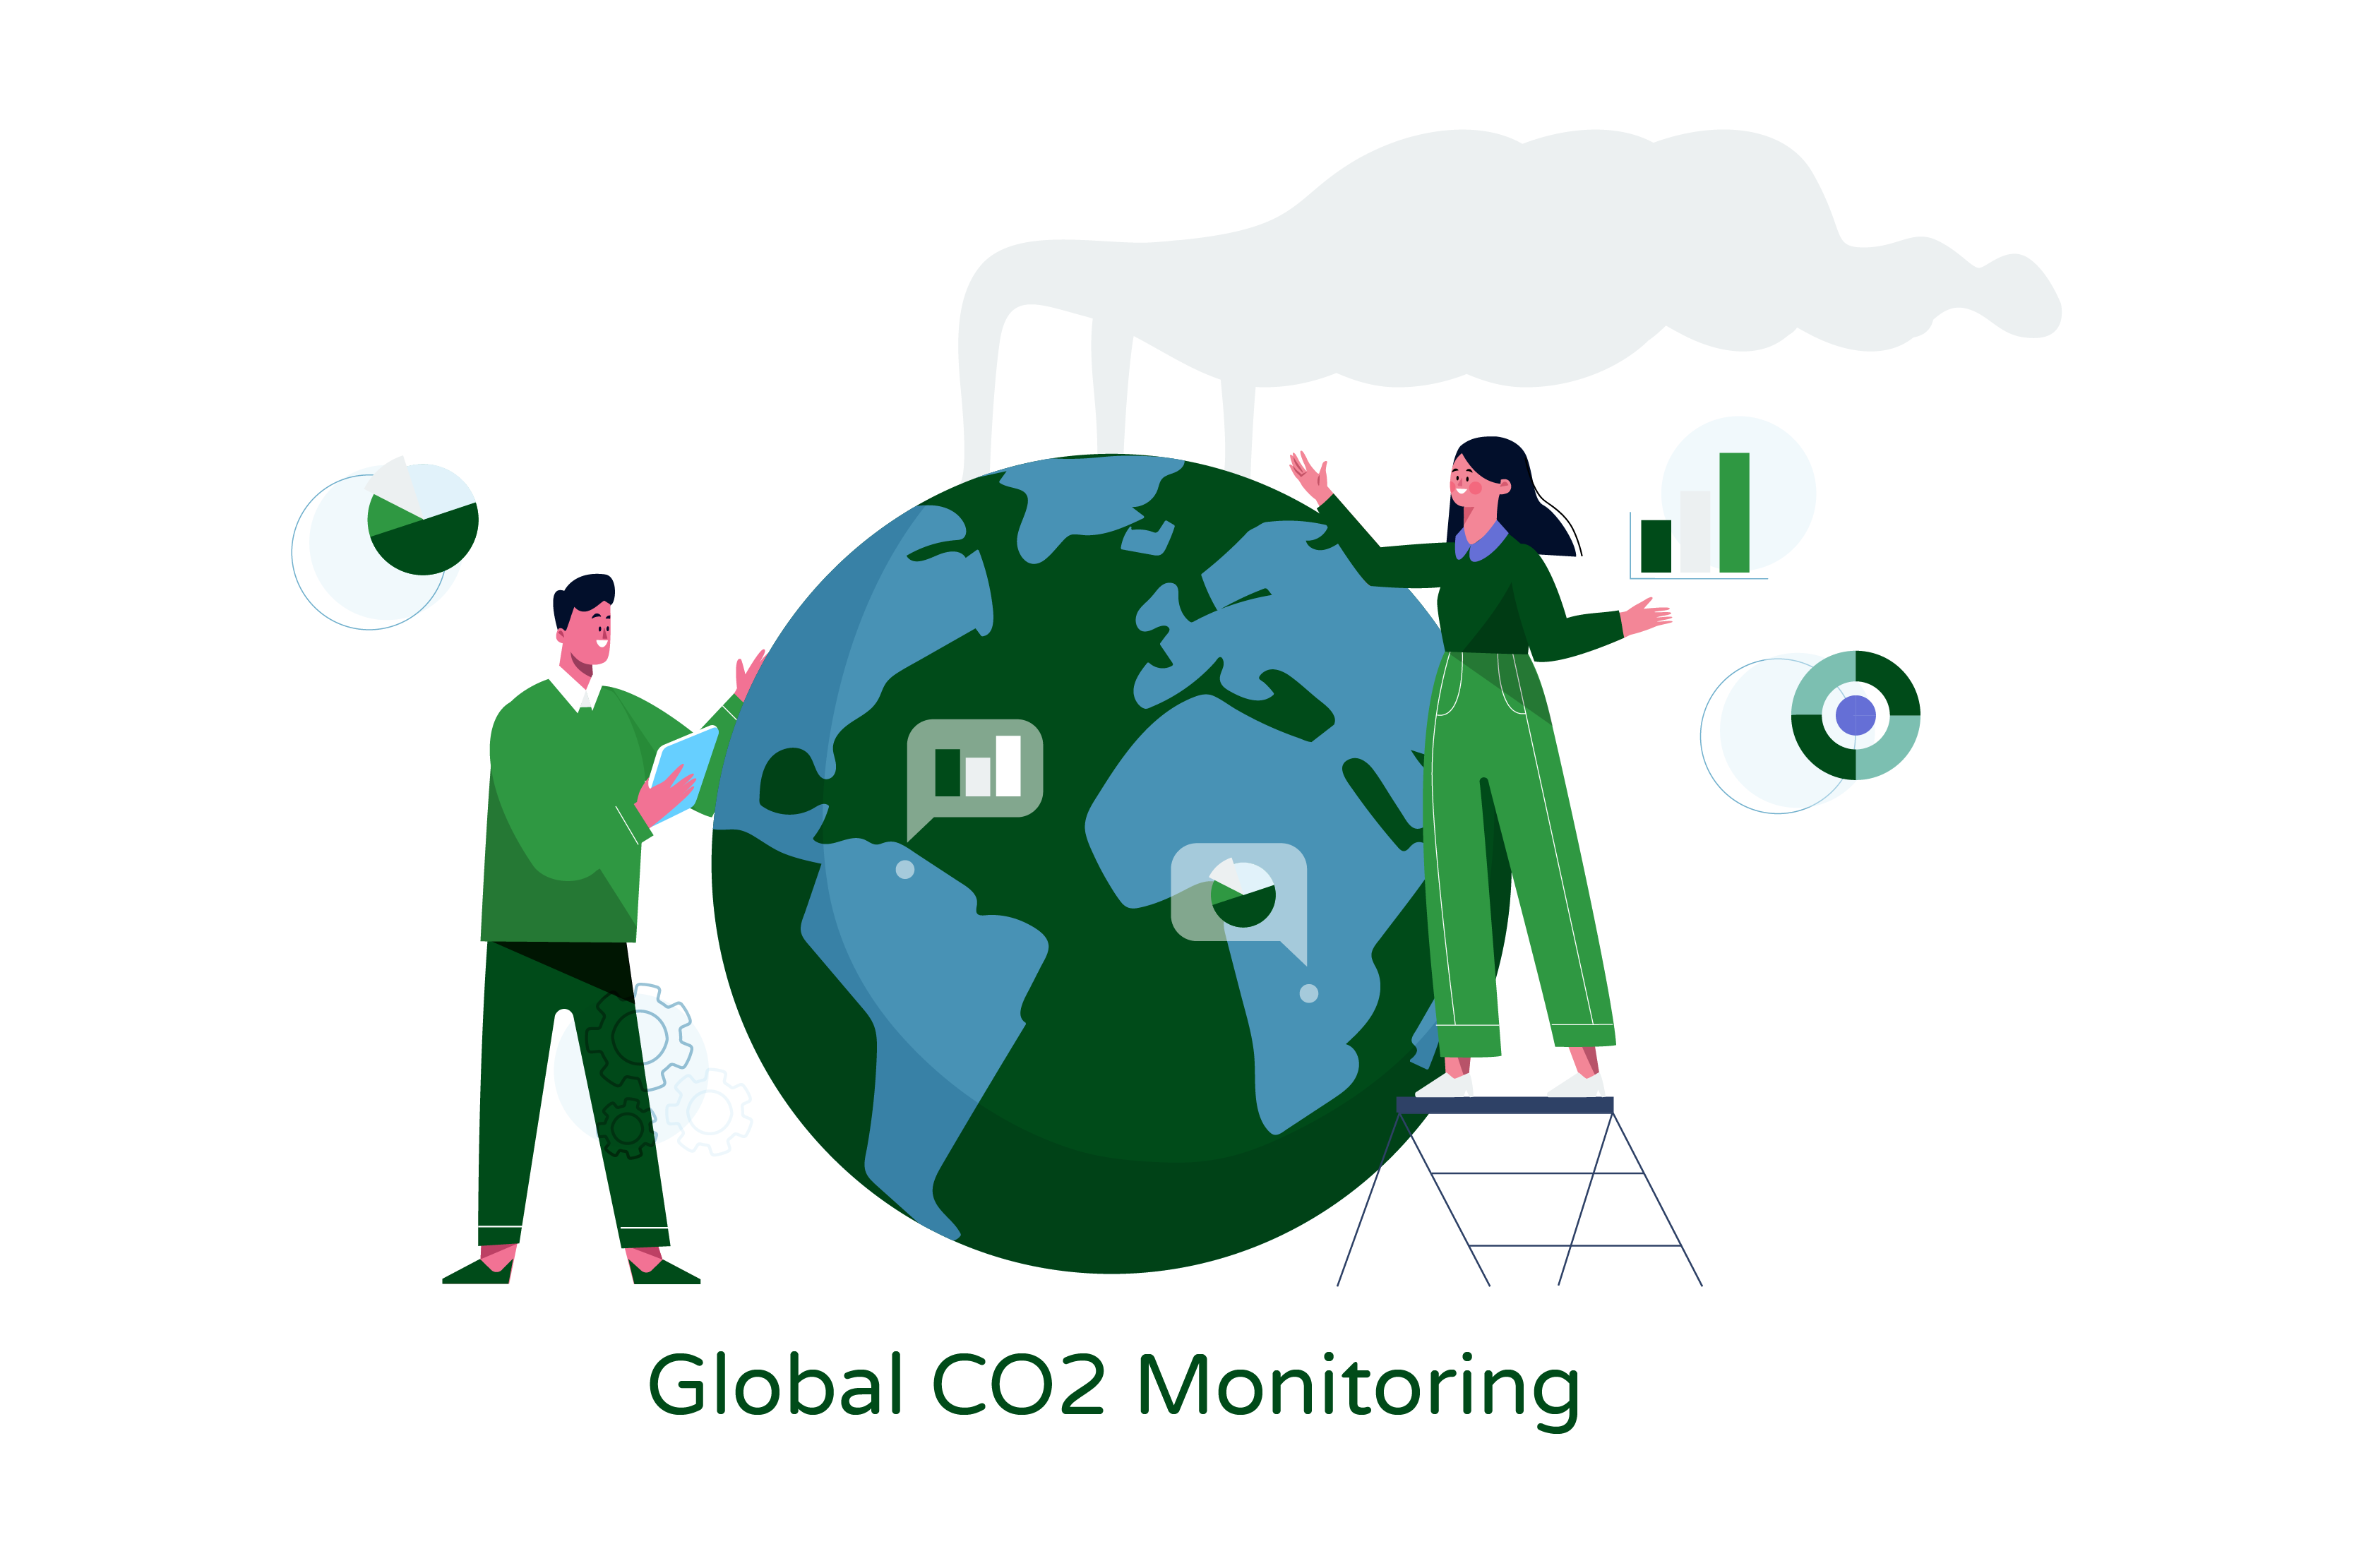 Illustration titled 'Global CO2 Monitoring' featuring a globe emitting CO2 and two people monitoring it with graphs and technology."  The illustration depicts a central element, a large globe emitting CO2, symbolizing global carbon dioxide emissions. Surrounding the globe, there are two individuals engaged in monitoring and analyzing CO2 levels using various tools and technologies.  The two people are shown using graphs and technology to track and analyze the CO2 emissions. They may be observing data on screens, interacting with sensors or instruments, or studying charts and graphs related to CO2 levels. This signifies their role in monitoring and assessing the global CO2 situation.  The illustration aims to represent the importance of monitoring CO2 emissions on a global scale and the utilization of advanced technology and data analysis in this process. It emphasizes the significance of understanding and tracking CO2 levels to address climate change and make informed decisions about mitigation strategies.